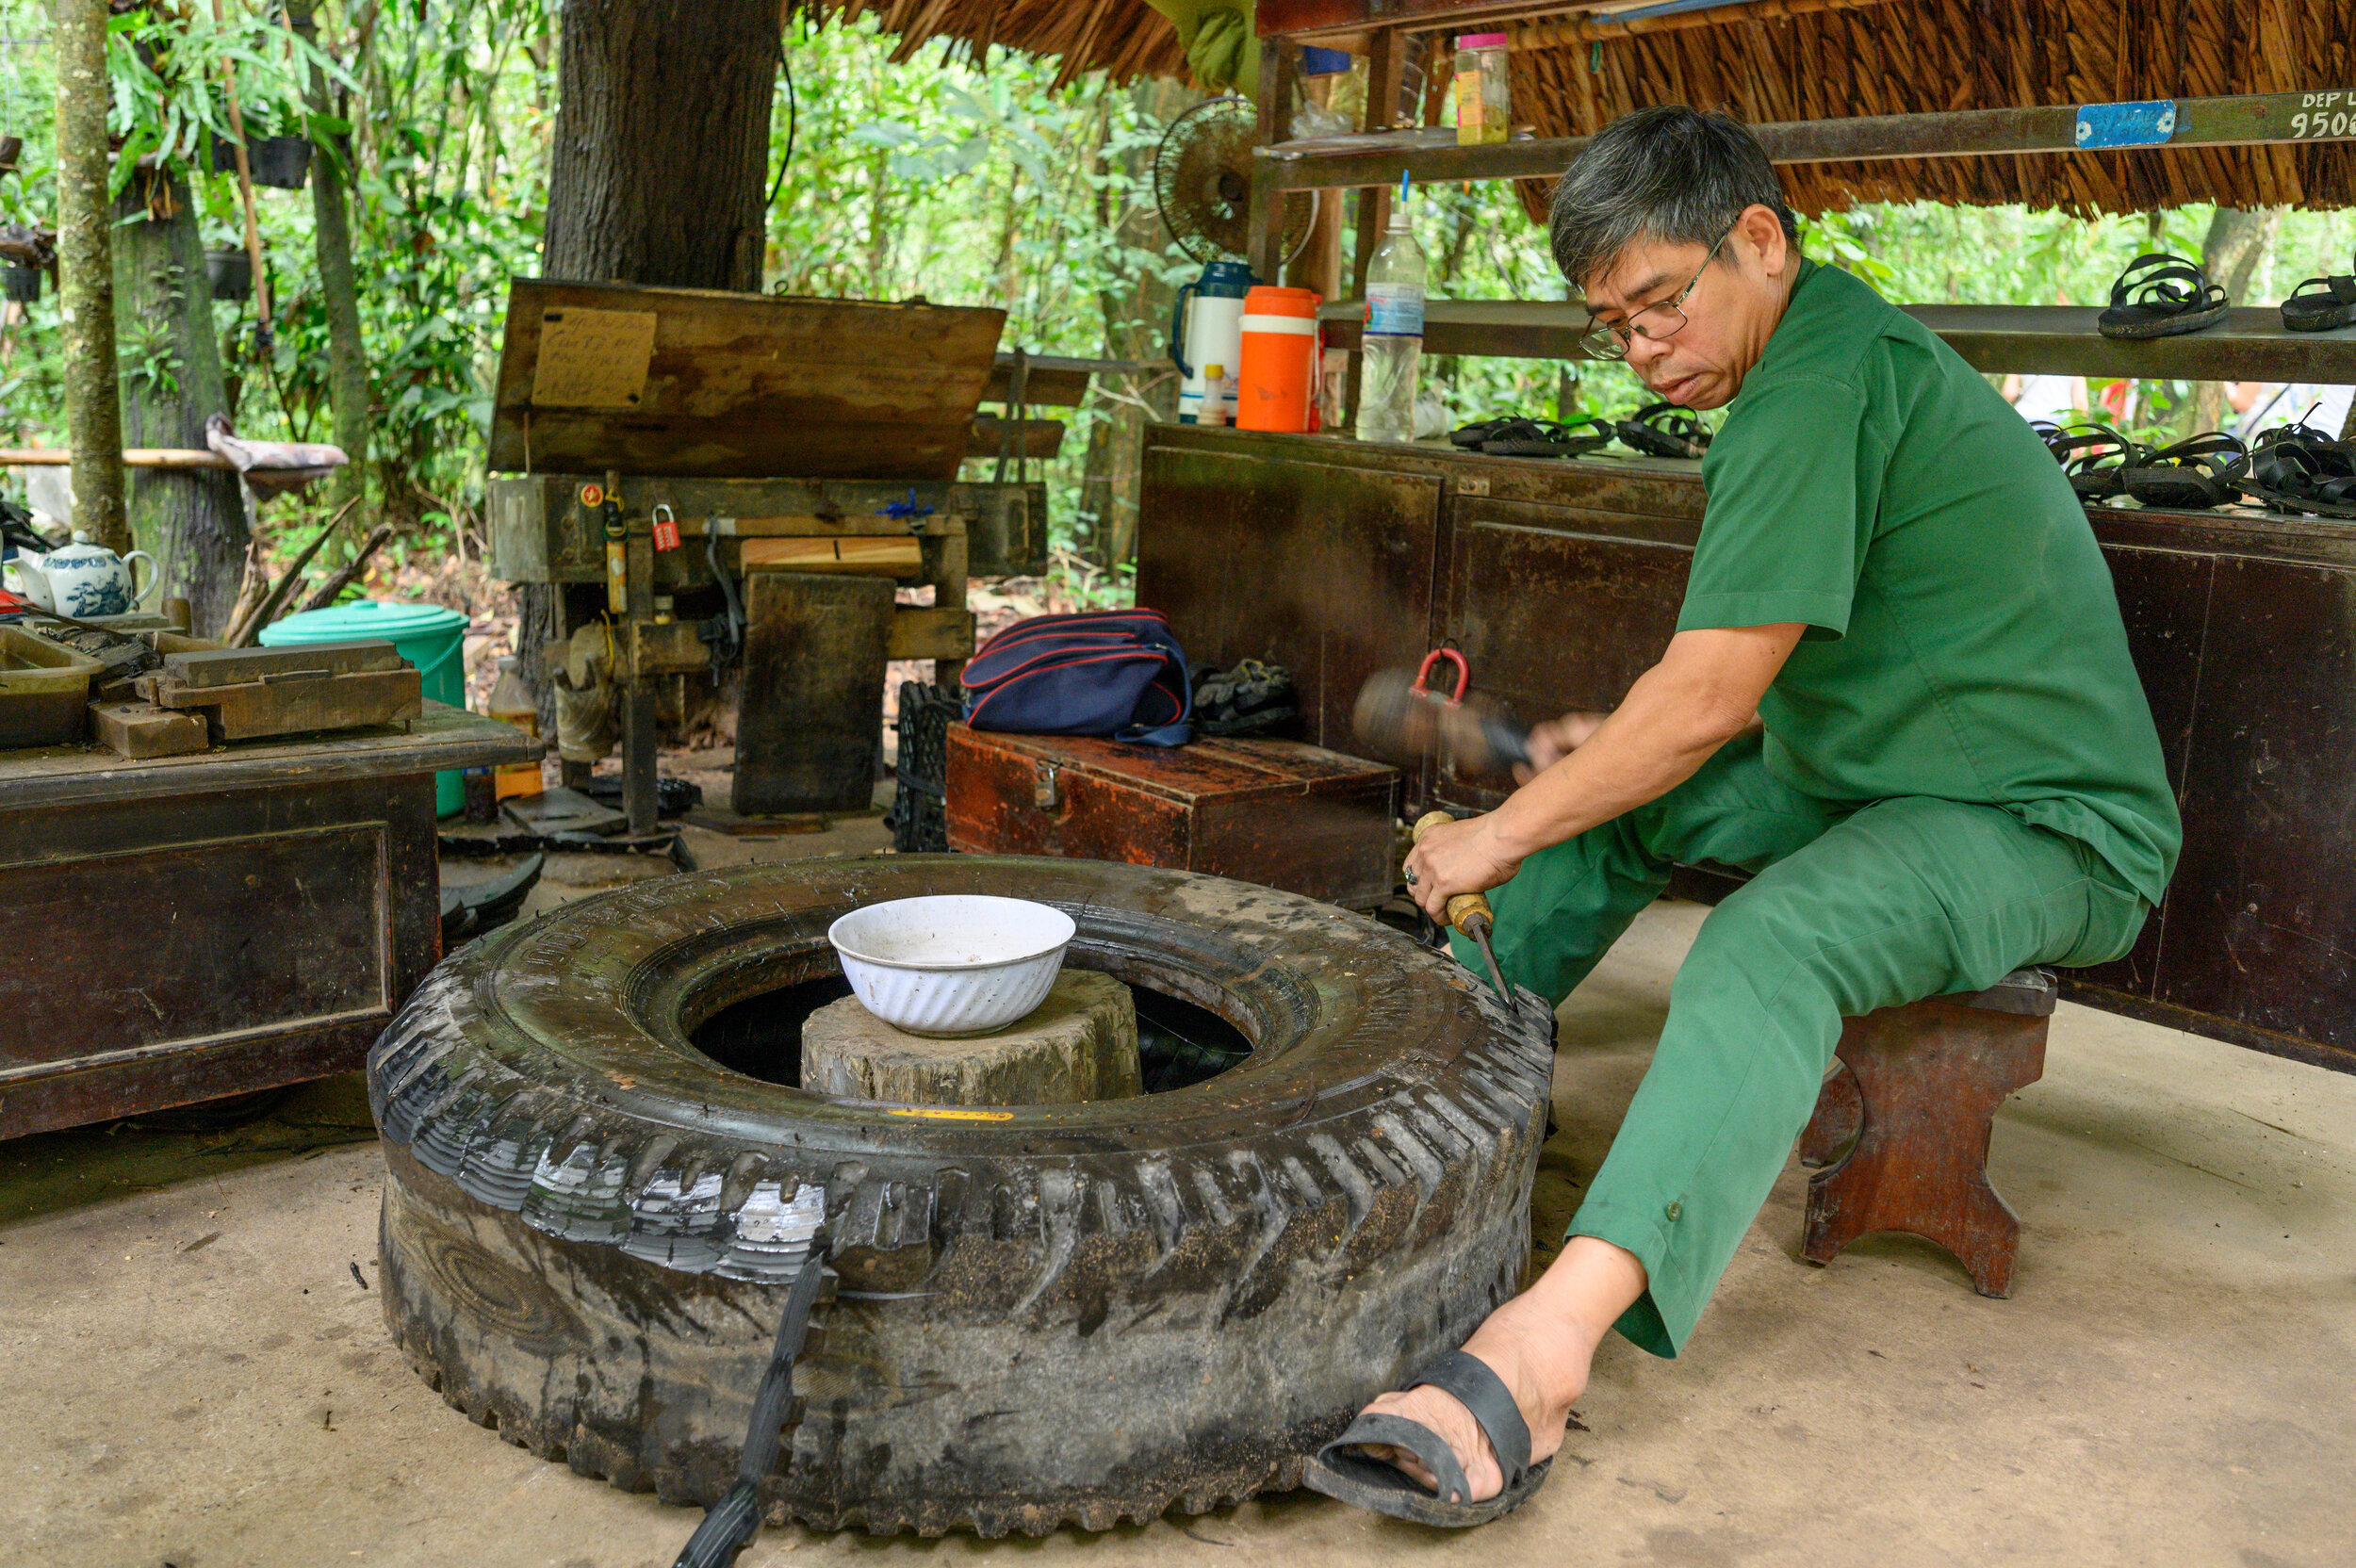 reusing rubber tires, see his shoes